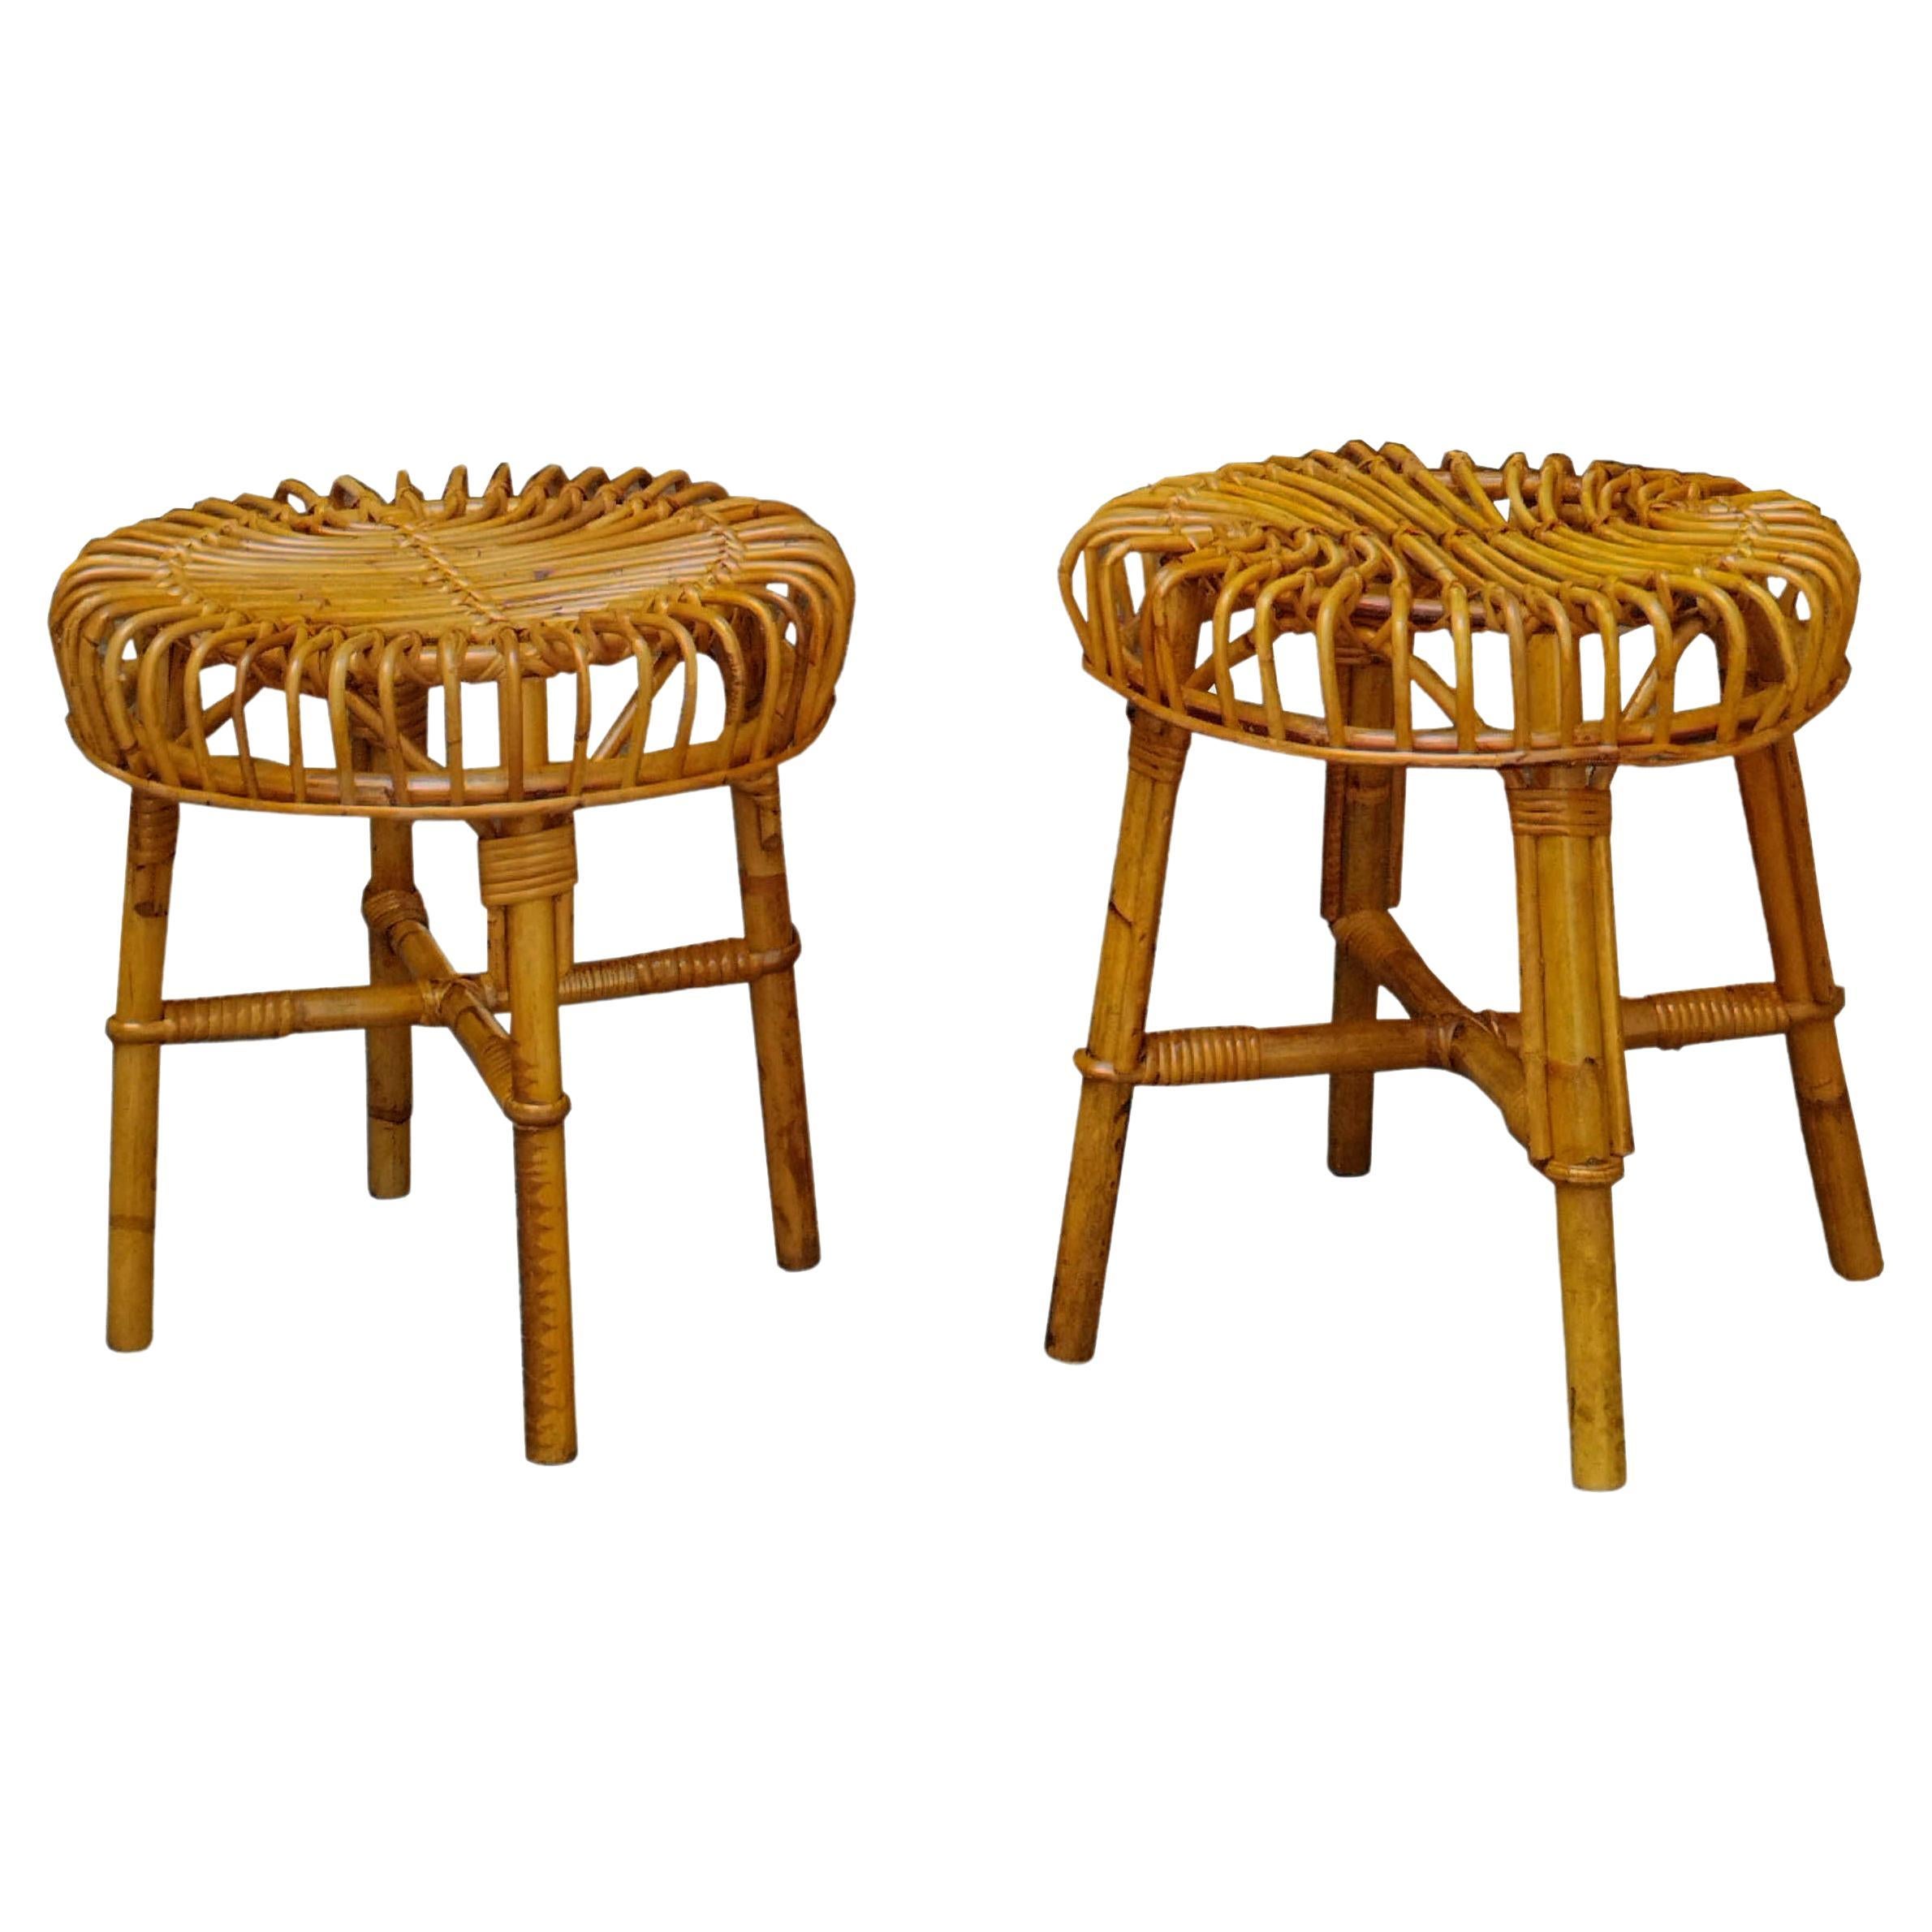 Franco Albini for Bonacina Pair of Rattan and Bamboo Stools, Italy, 1960s For Sale